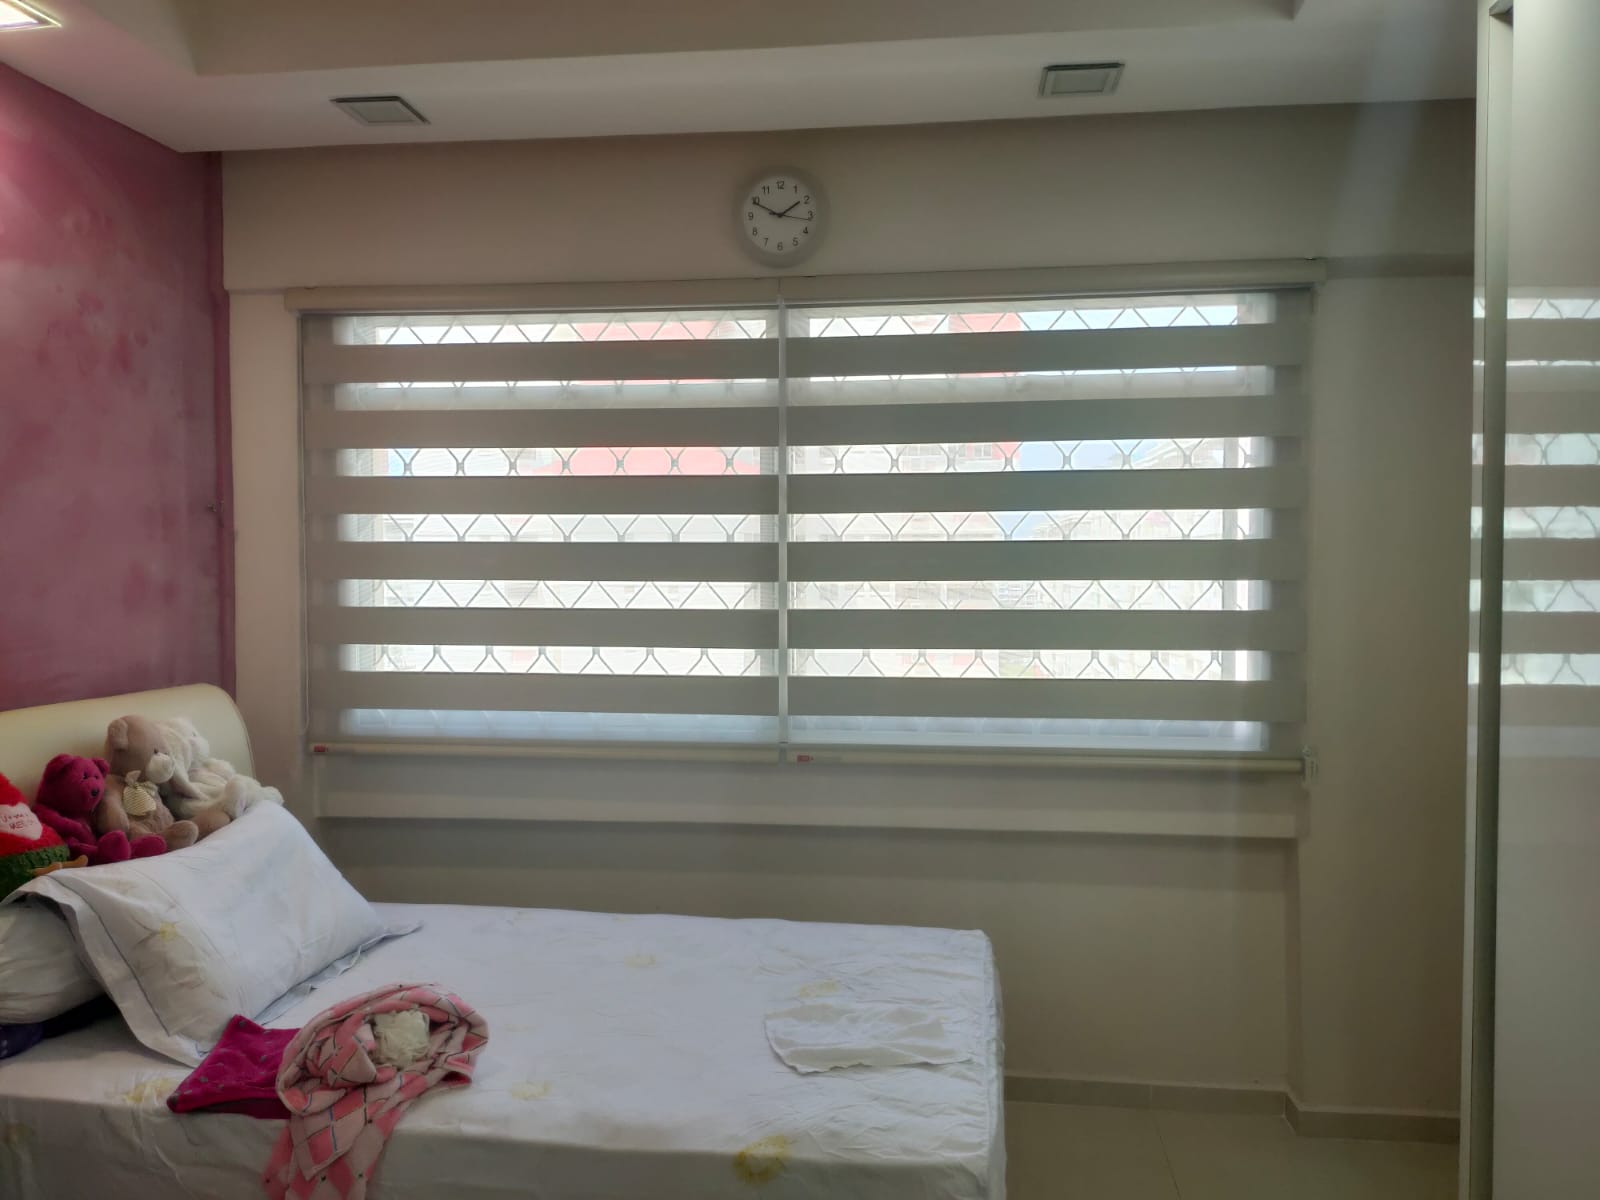 This is a Picture of Blackout korean Combi Blinds at Singapore HDB 526 Pasir Ris Street 52